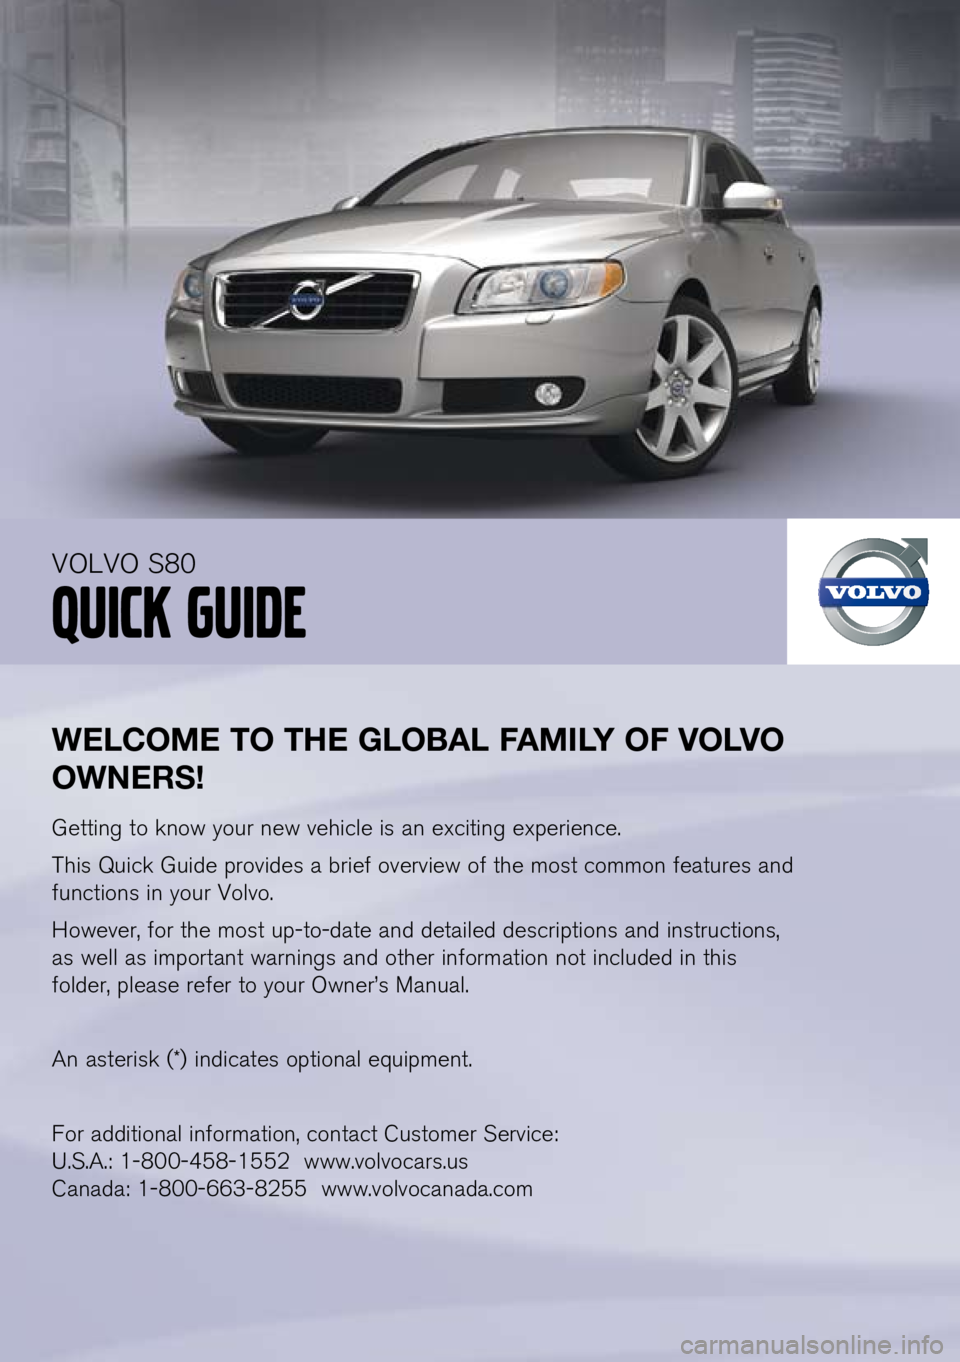 VOLVO S80 2011  Quick Guide 
WElCOME	 TO	THE	gl Obal	fa MIlY	 Of	v Olv O	
OW nER s!
Getting to know your new vehicle is an exciting experience.
This Quick Guide provides a brief overview of the most common features and 
function